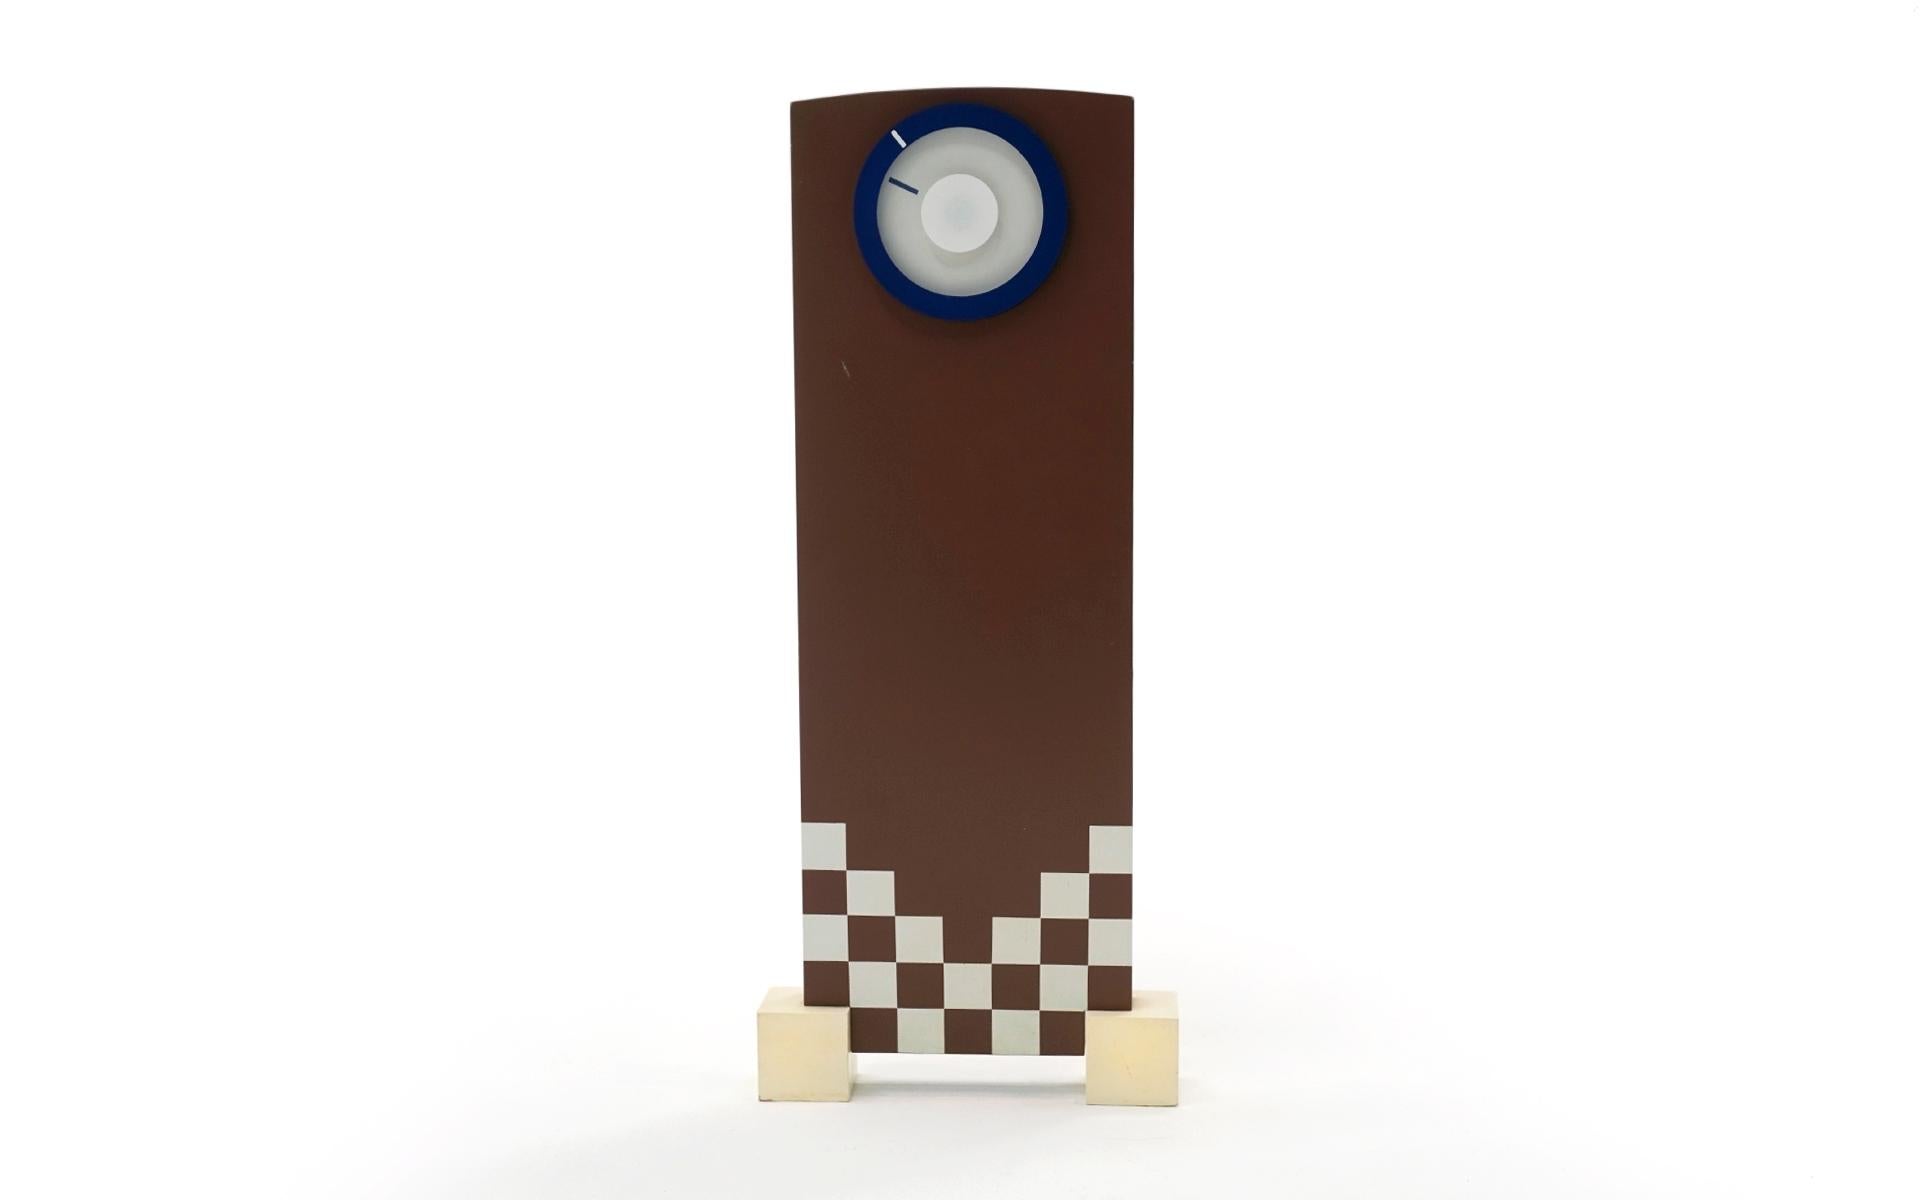 Rare postmodern brown and cream checkerboard table clock by Howard Miller Clock Company. From the 1984 